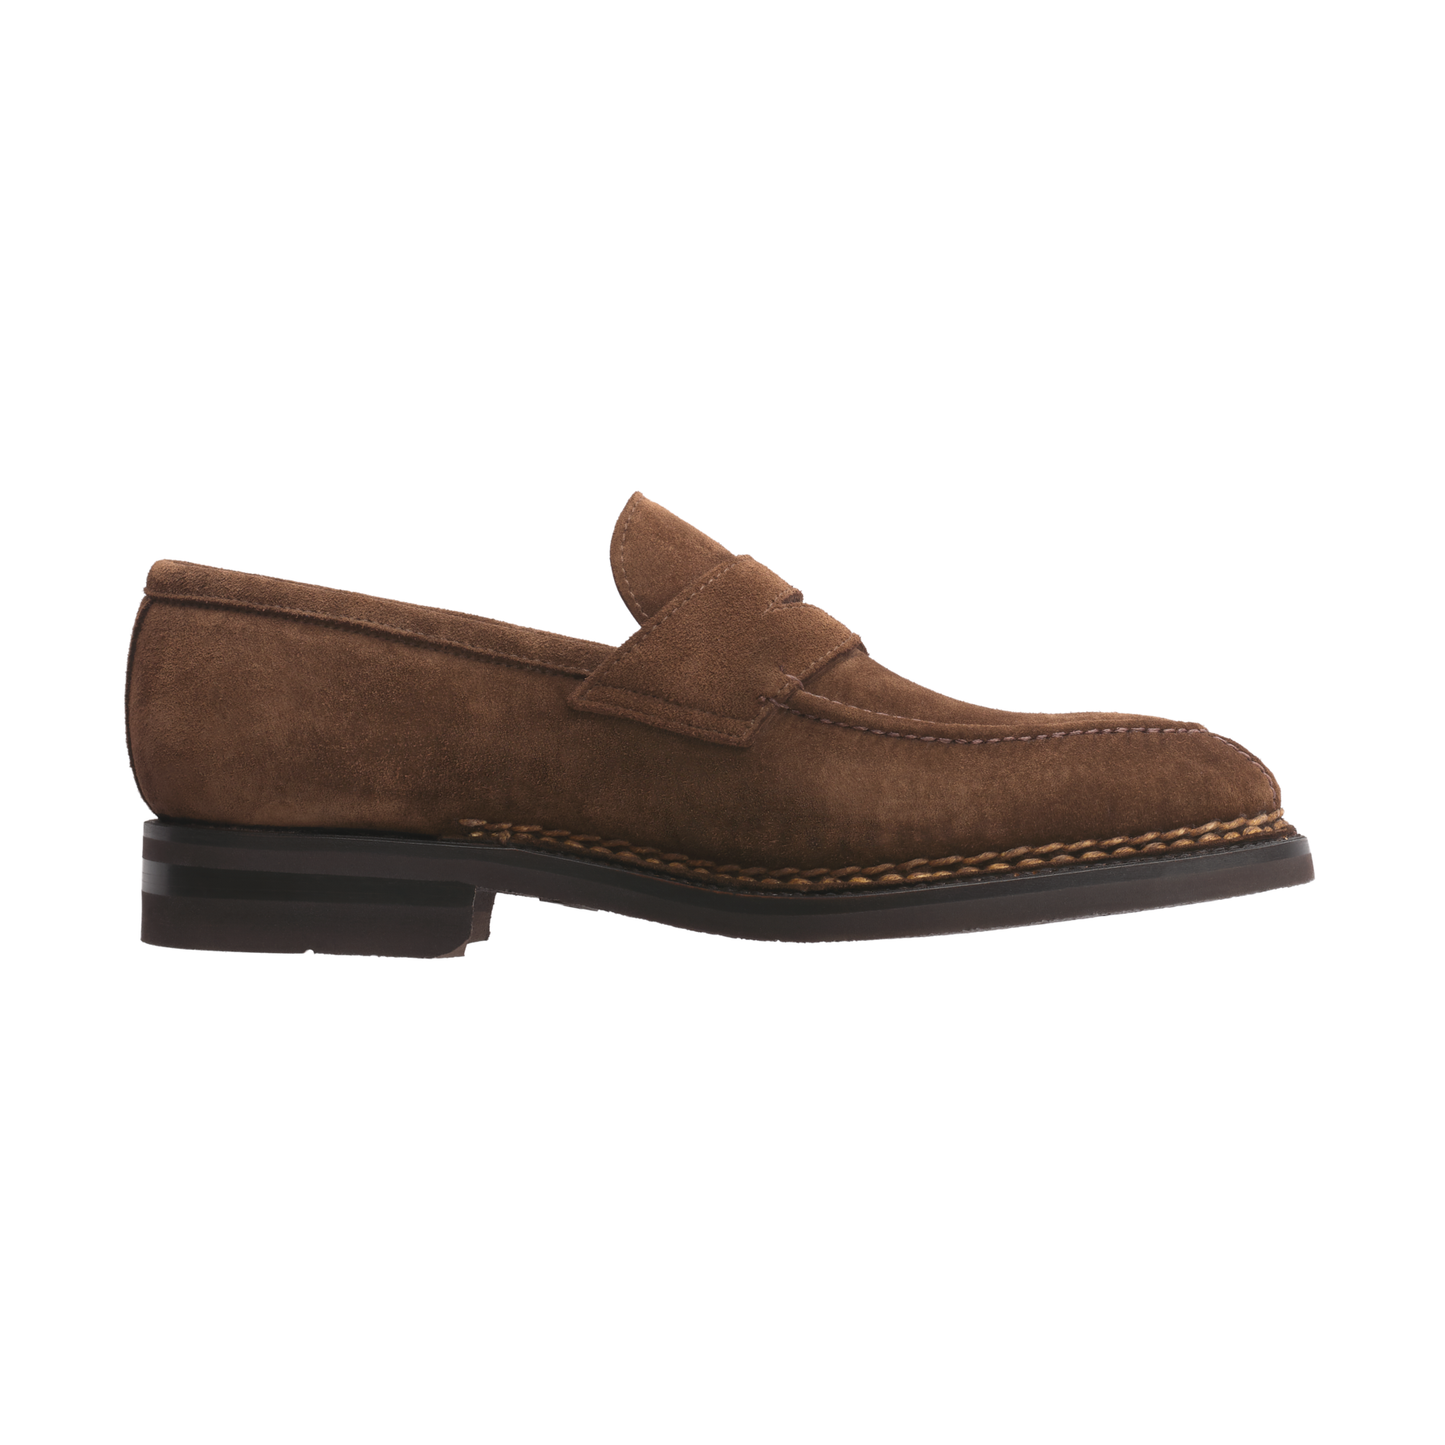 Bontoni "Principe" Penny Suede Loafer with Hand Stitched Details and Split Toe in Brown - SARTALE